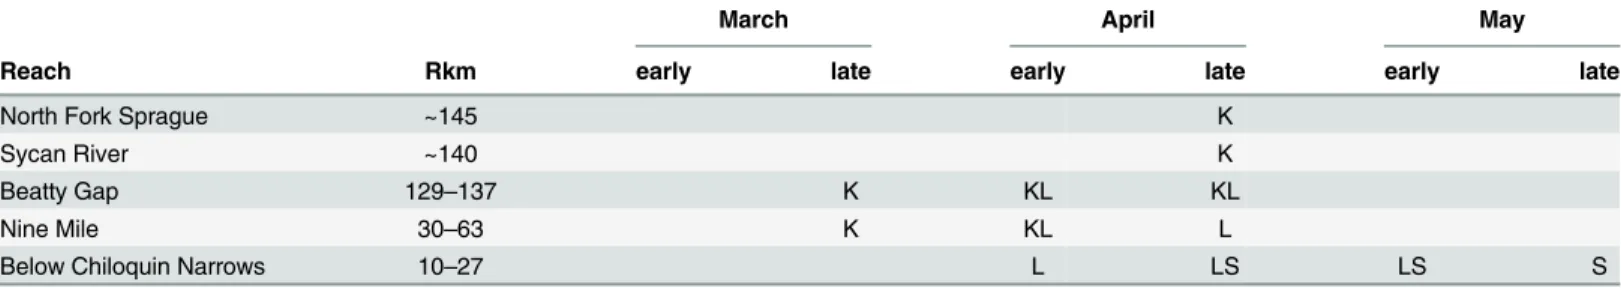 Table 4. Approximate spawning times and locations for suckers in the Sprague River based on USGS radio tagged specimens in 2005.